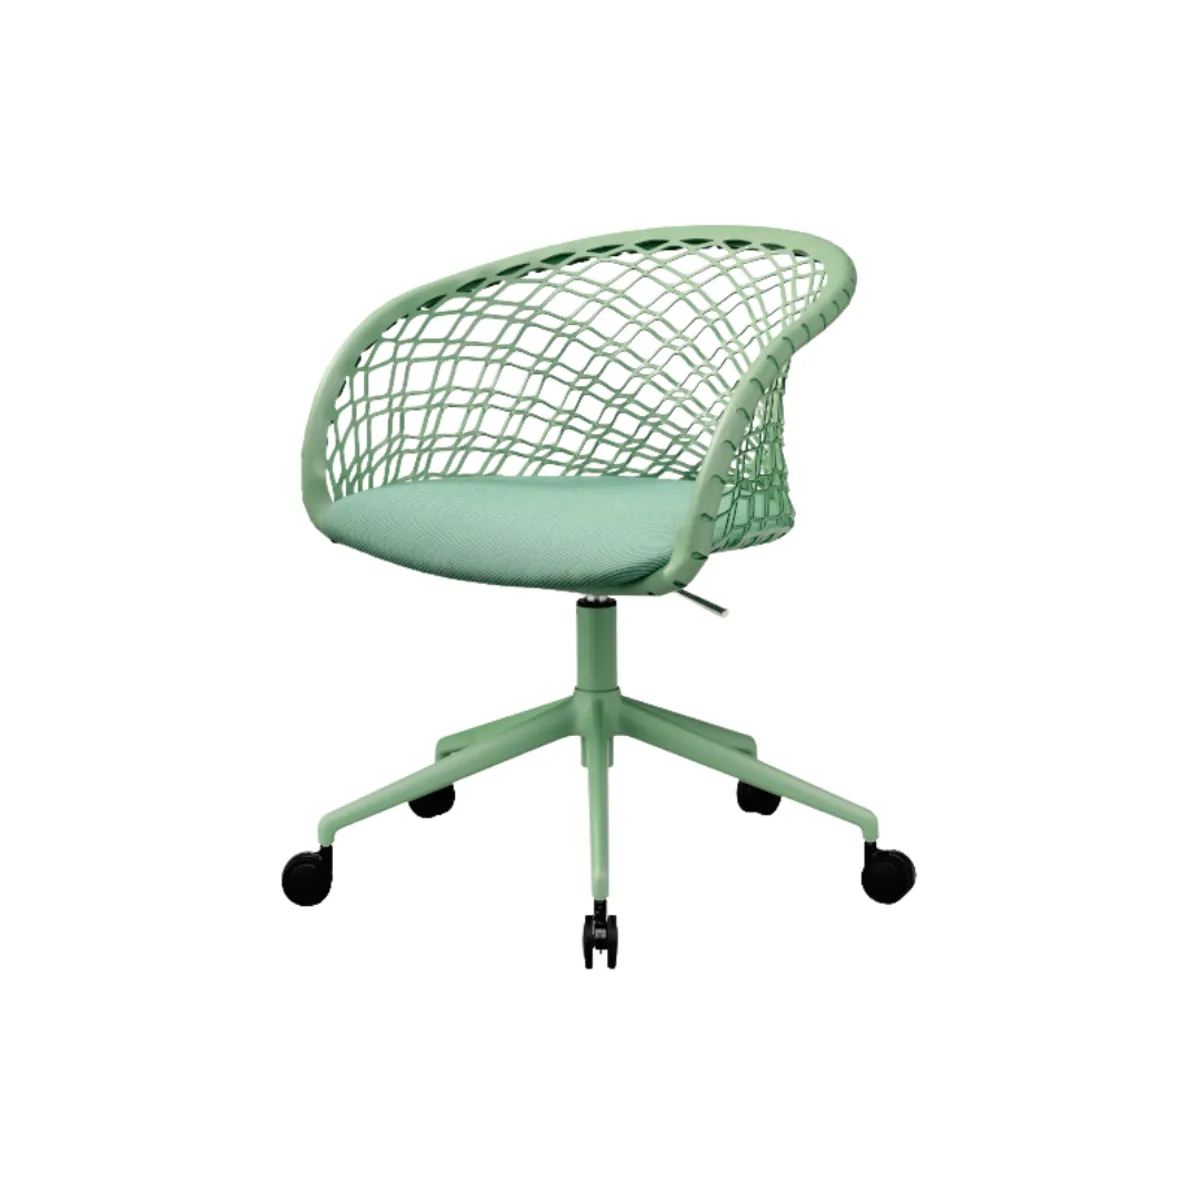 P47 office chair 1